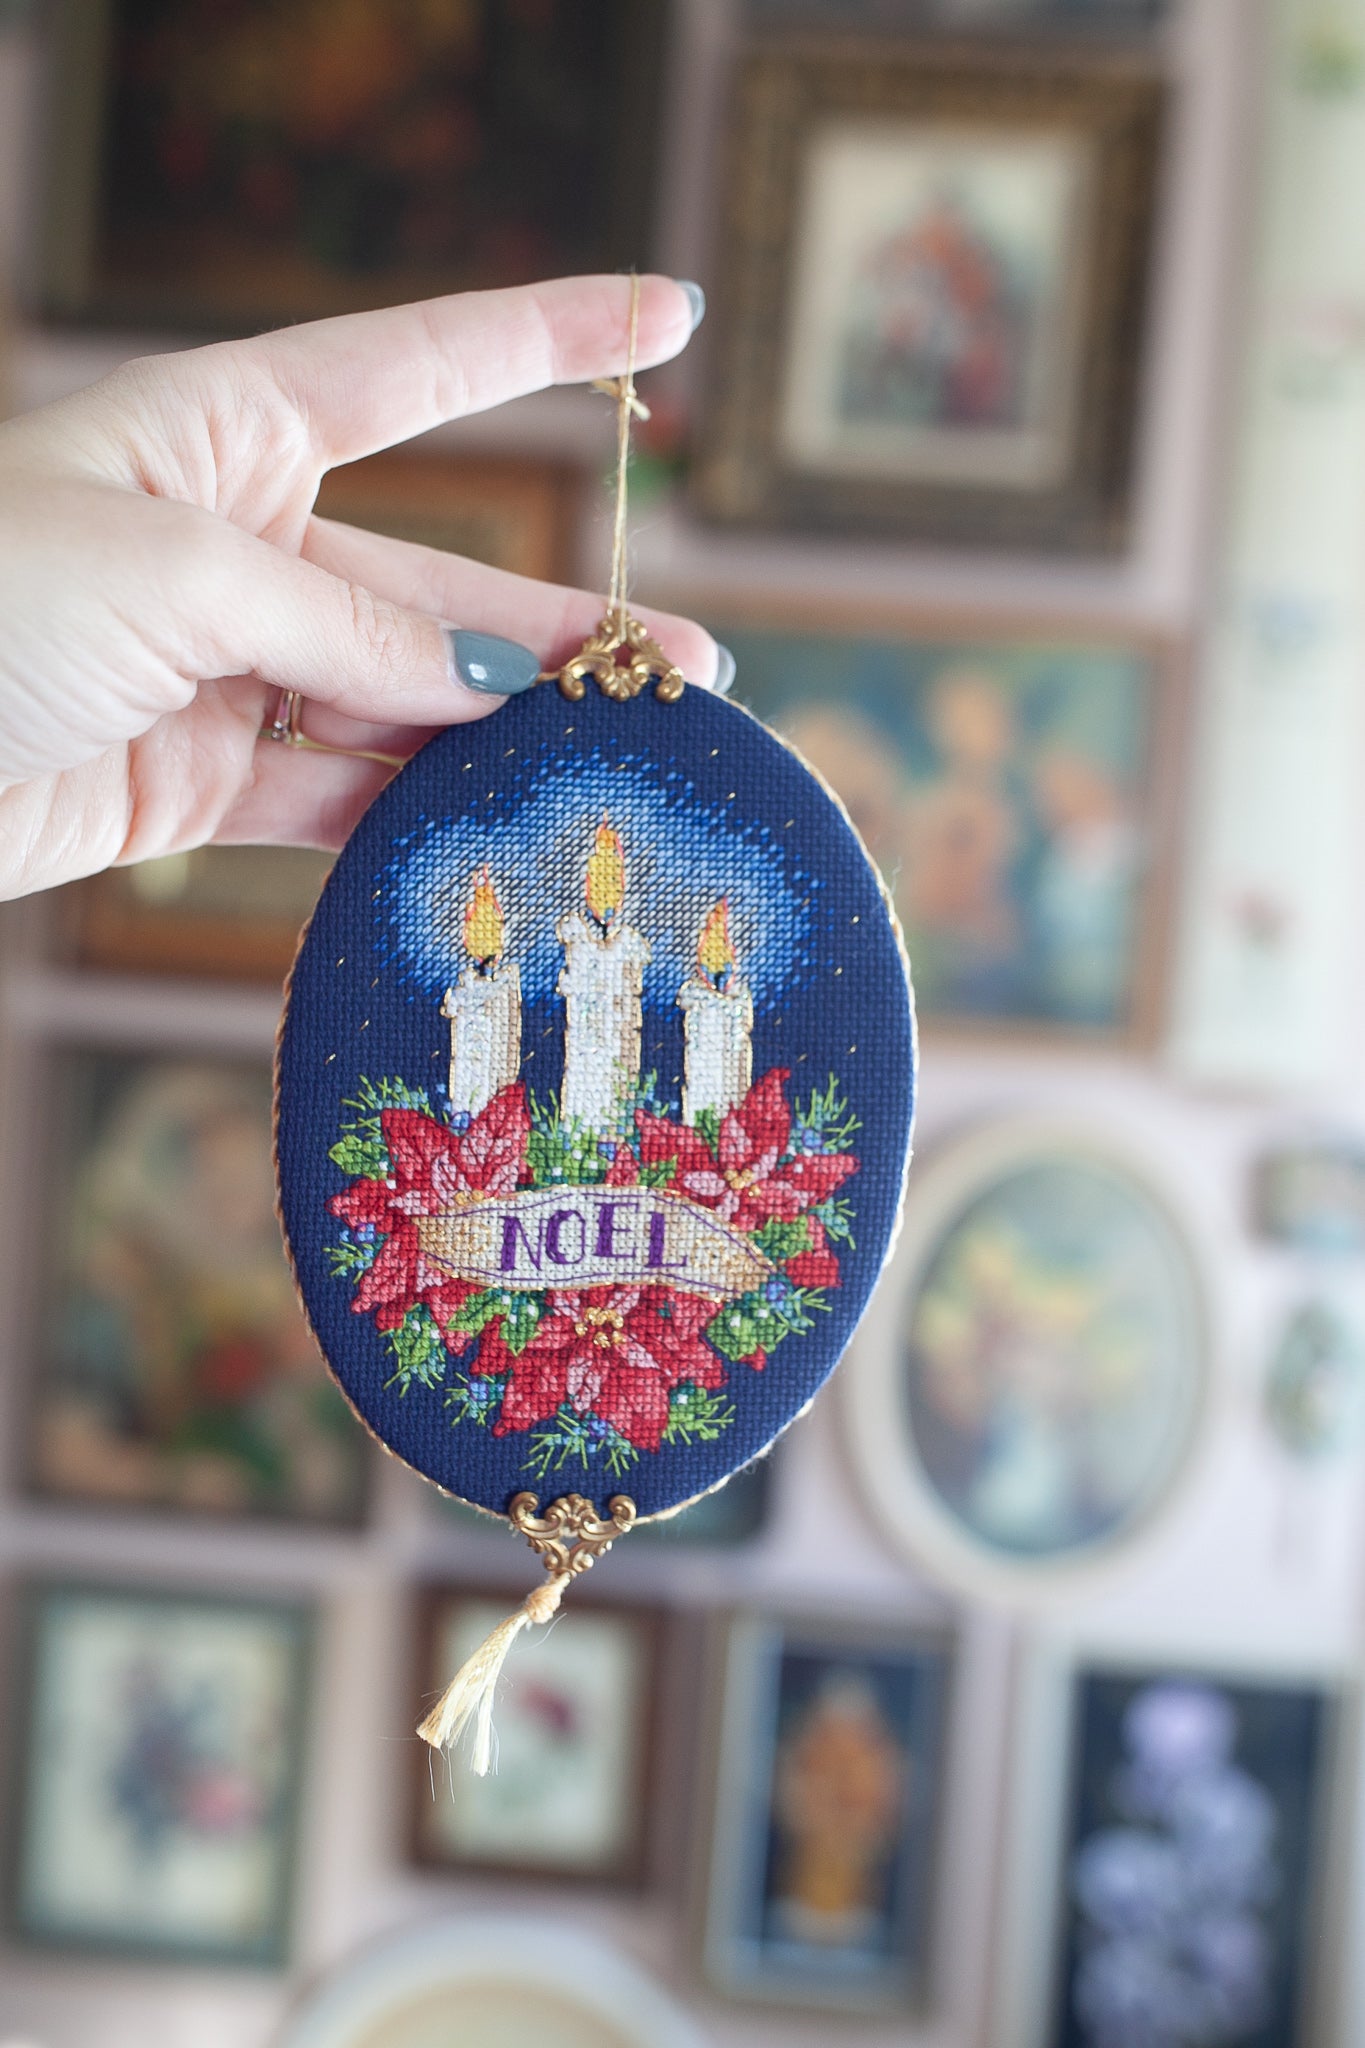 Noel -Cross Stitch -Vintage Noel - Ornament -  Gold Collection Petites Candlelit Noel Christmas Cross Stitch - Completed